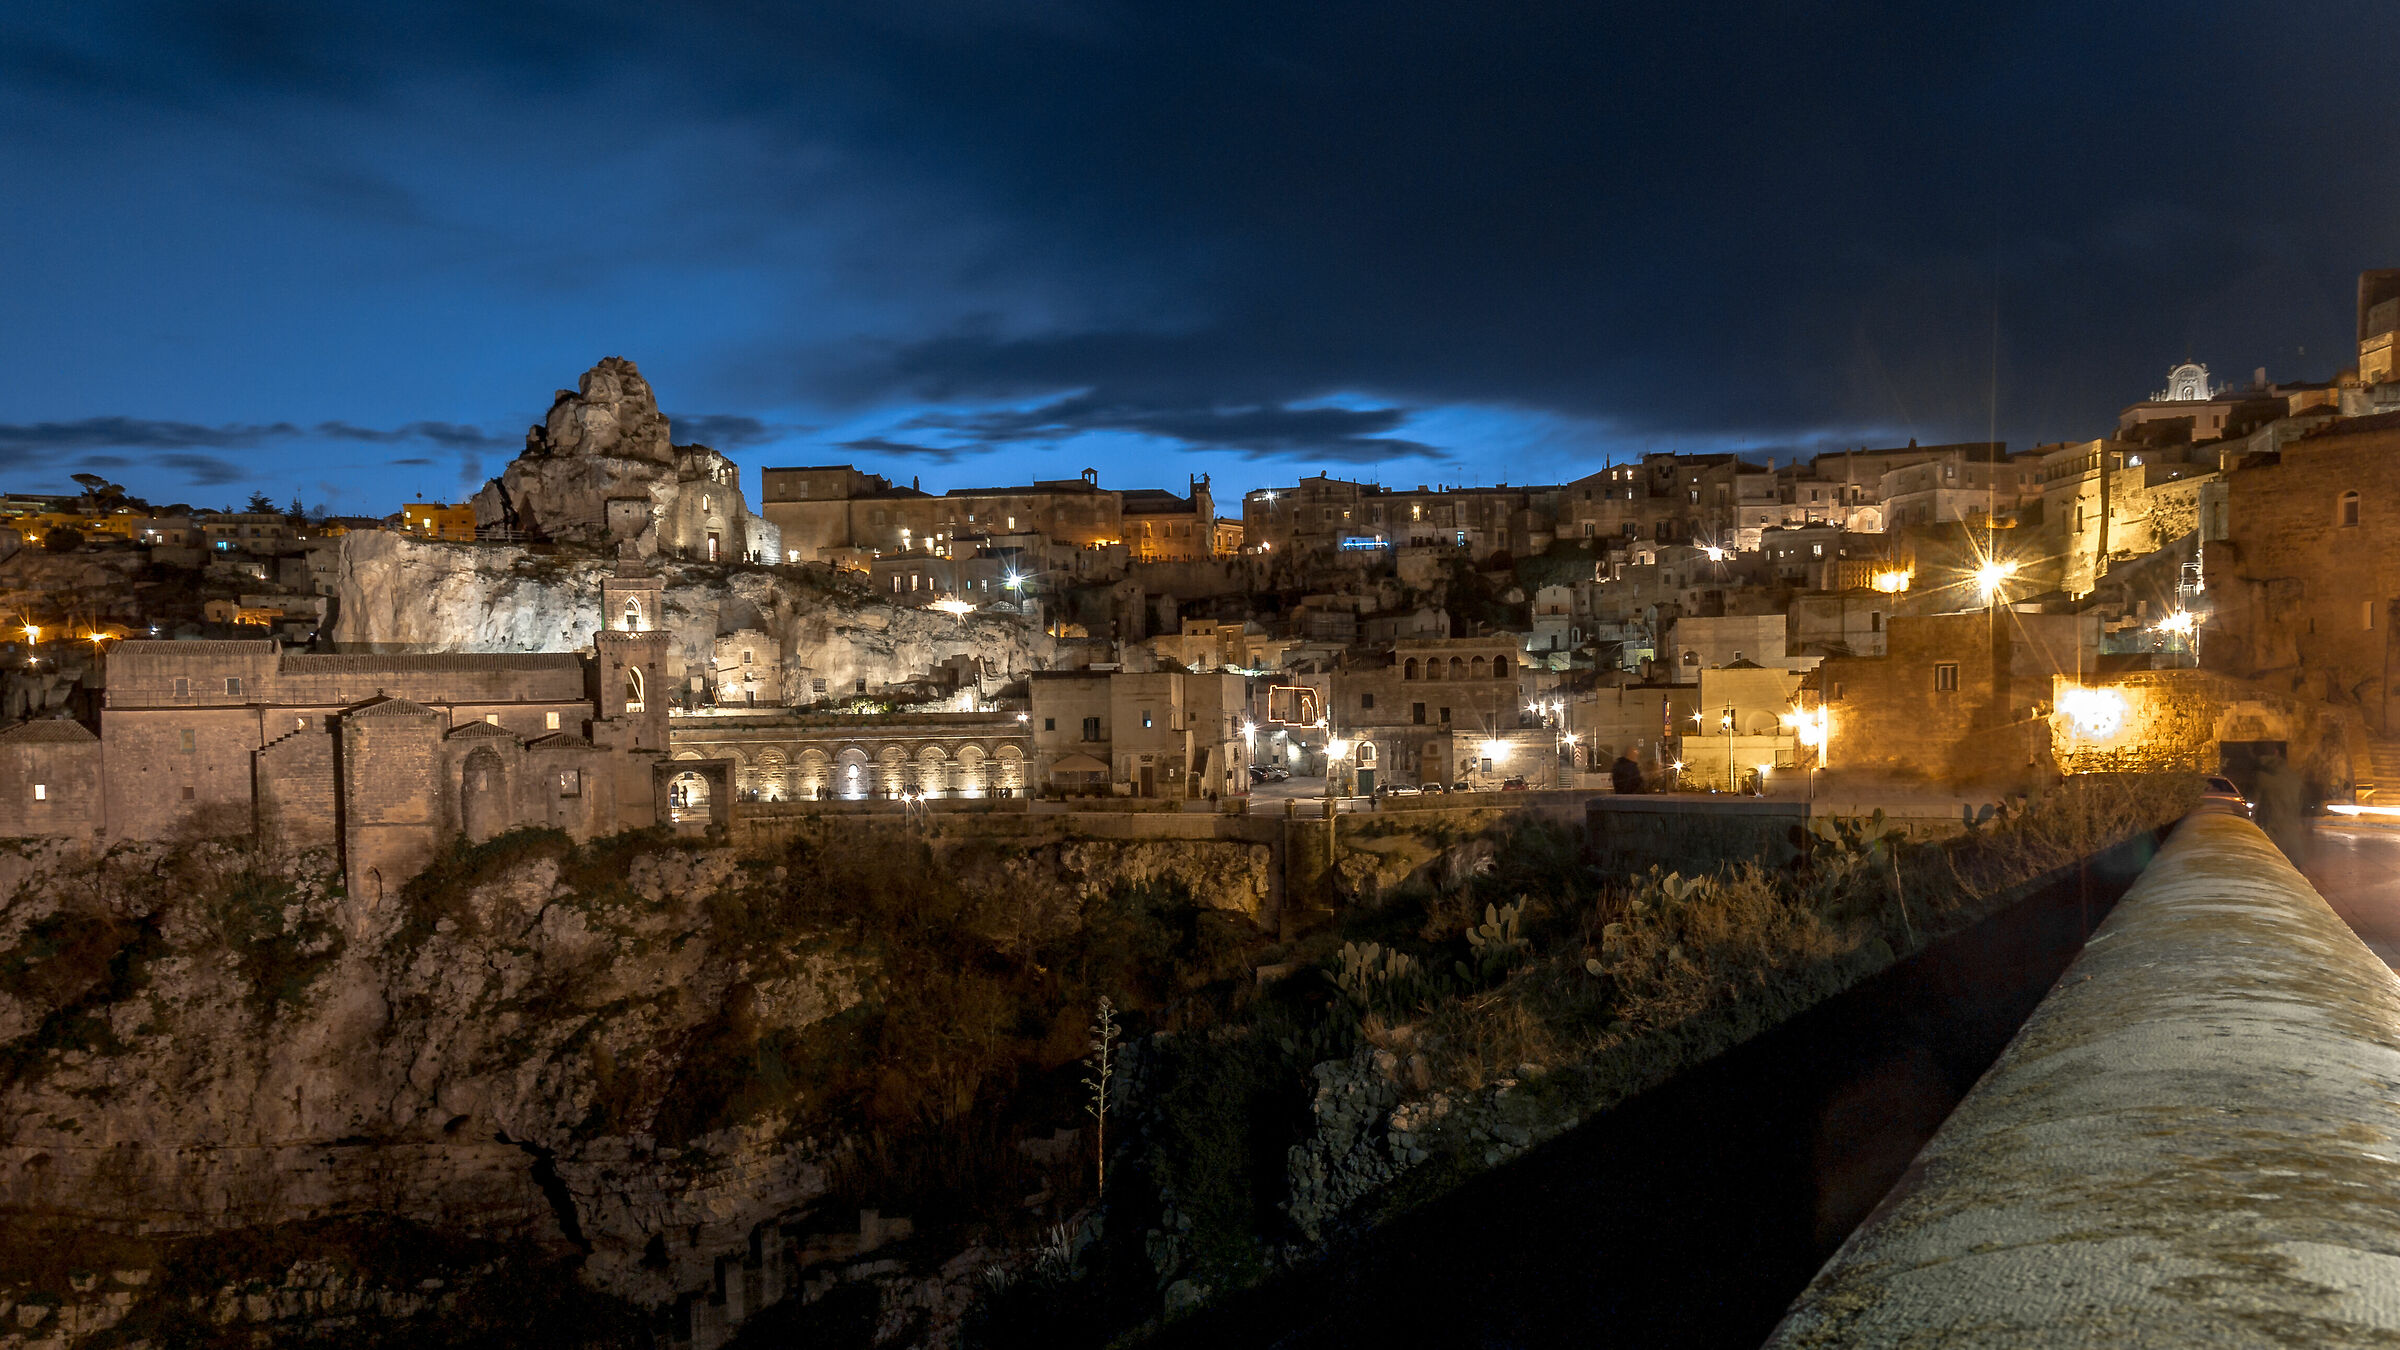 The Lights of Matera...